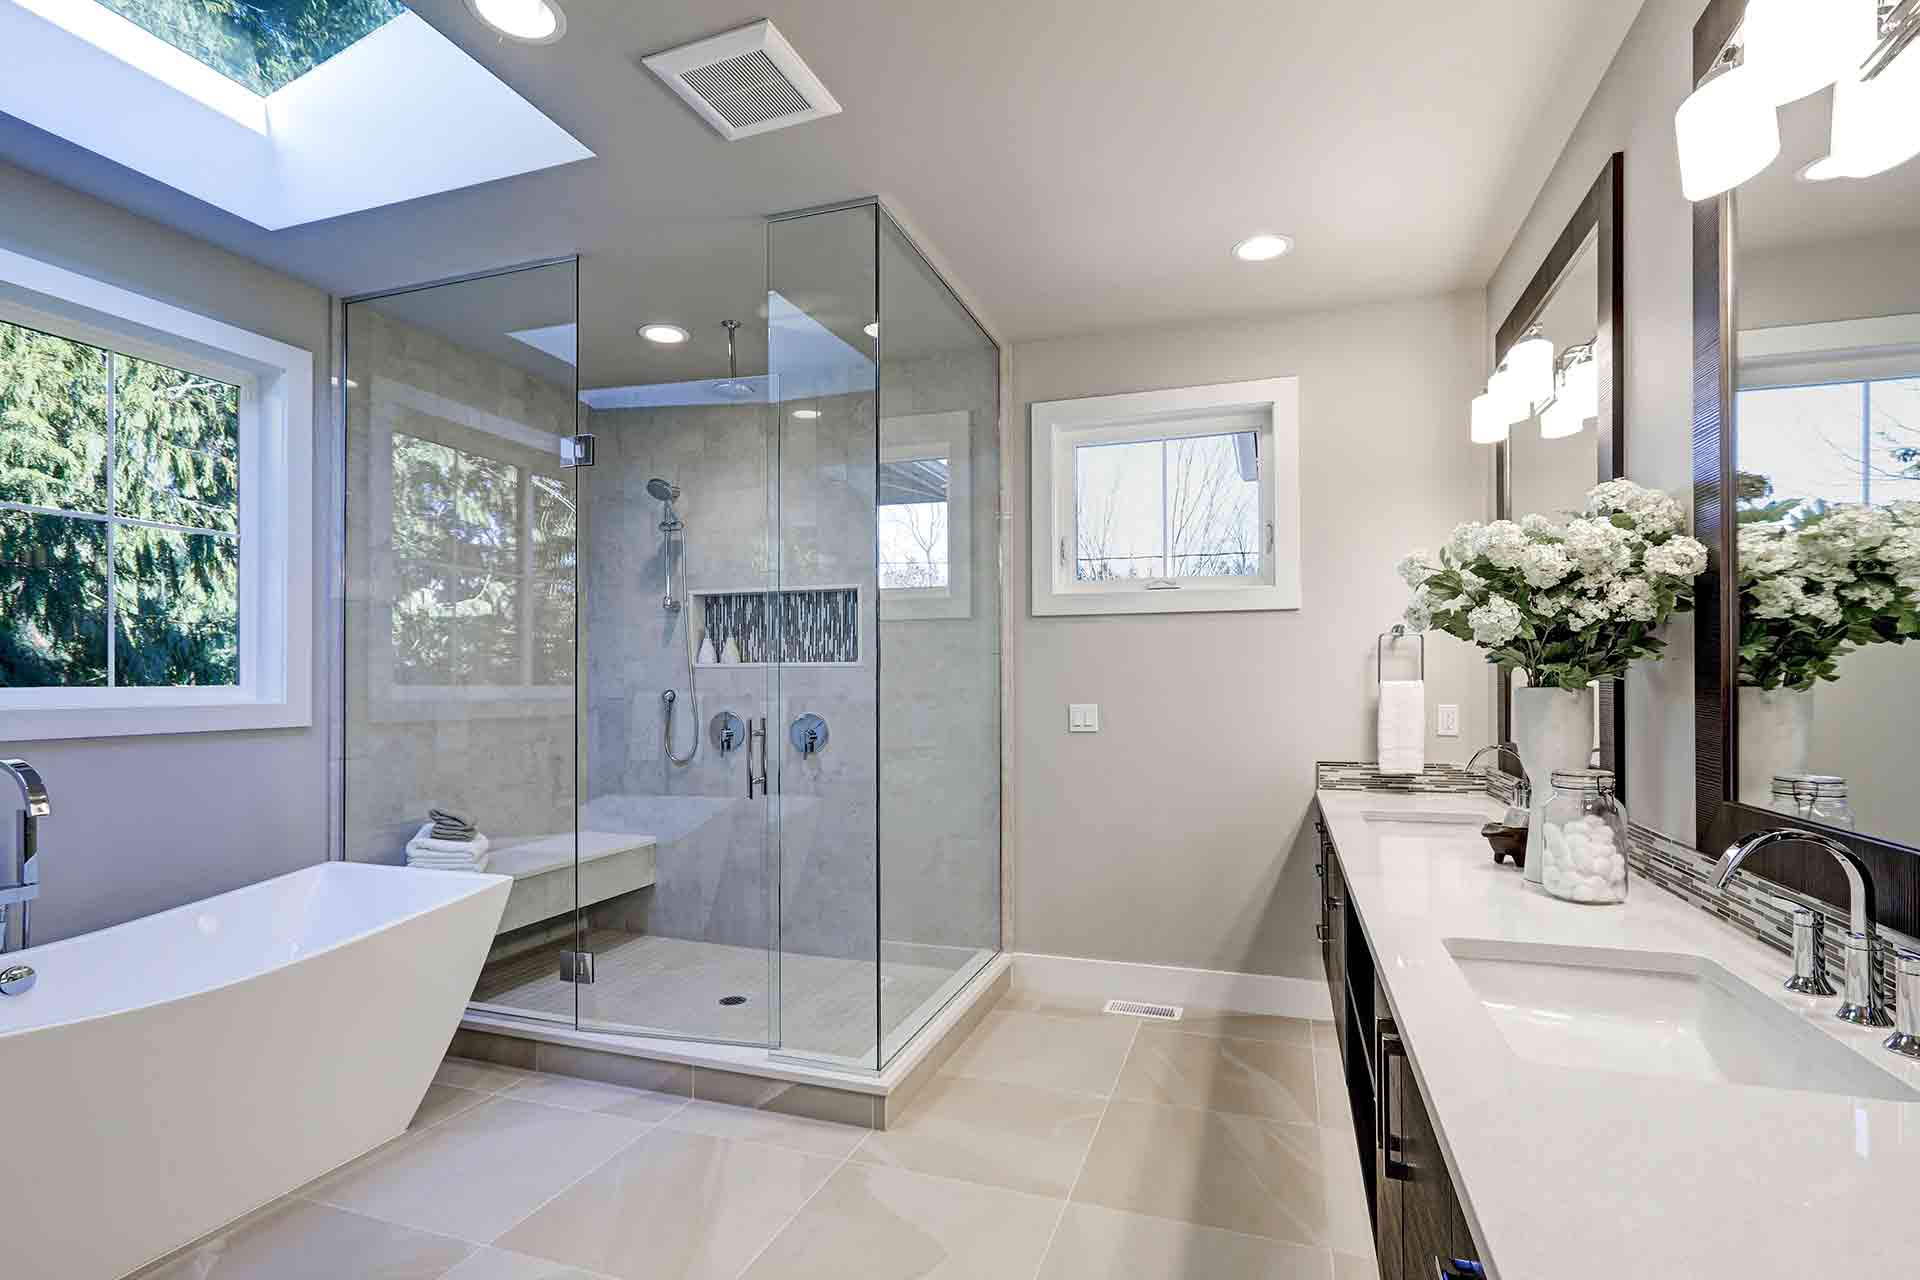 A Guide To Planning and Designing Your New Bathroom | Checkatrade